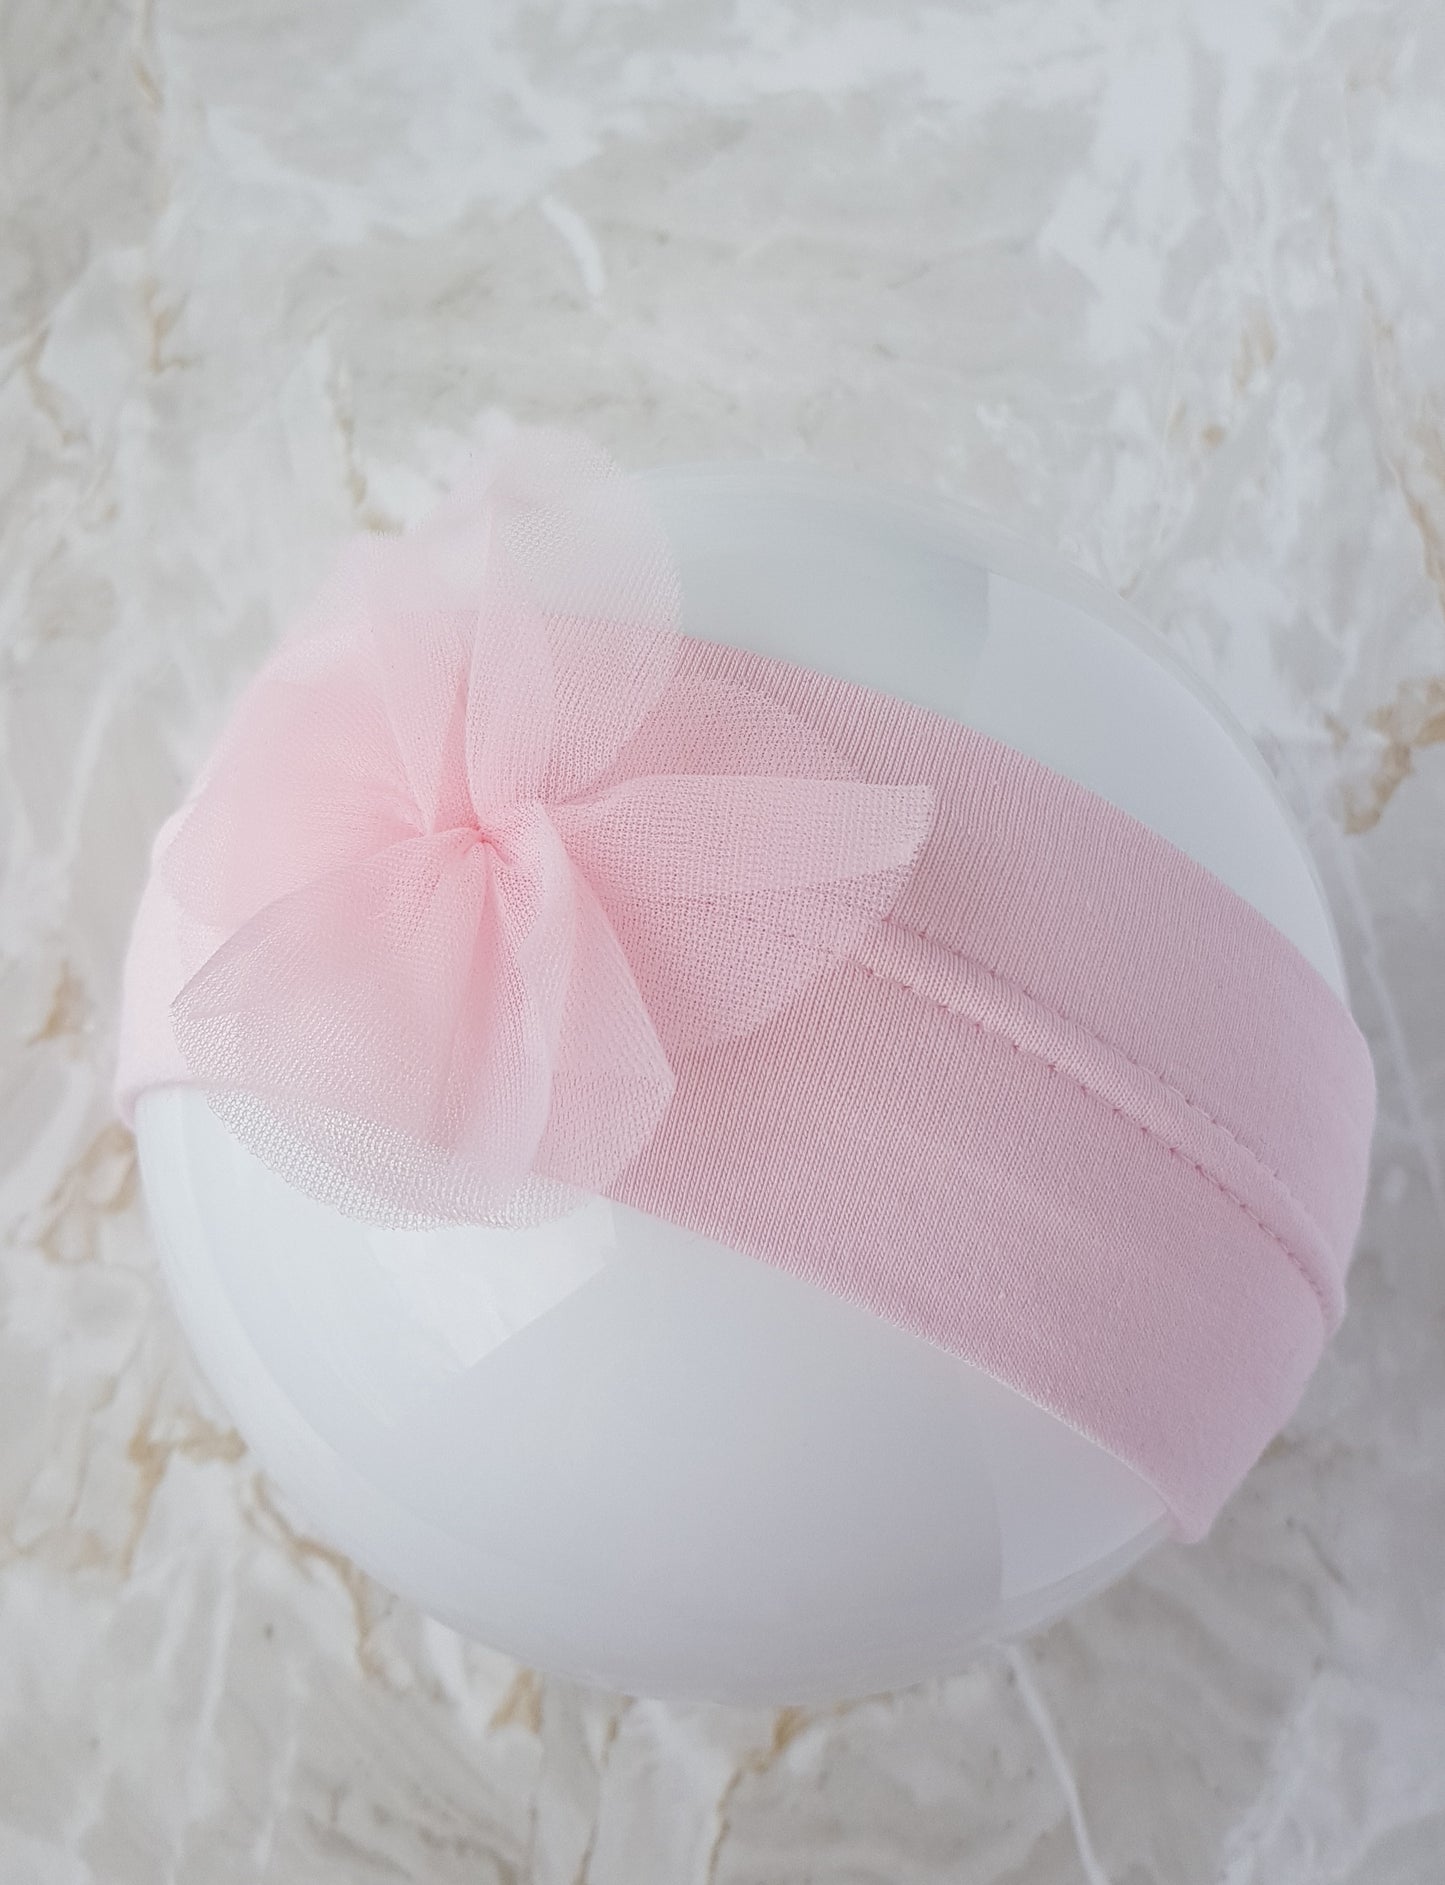 Cotton flower Baby Girl headband, 7 to 16 months old,  head size 46-48cm